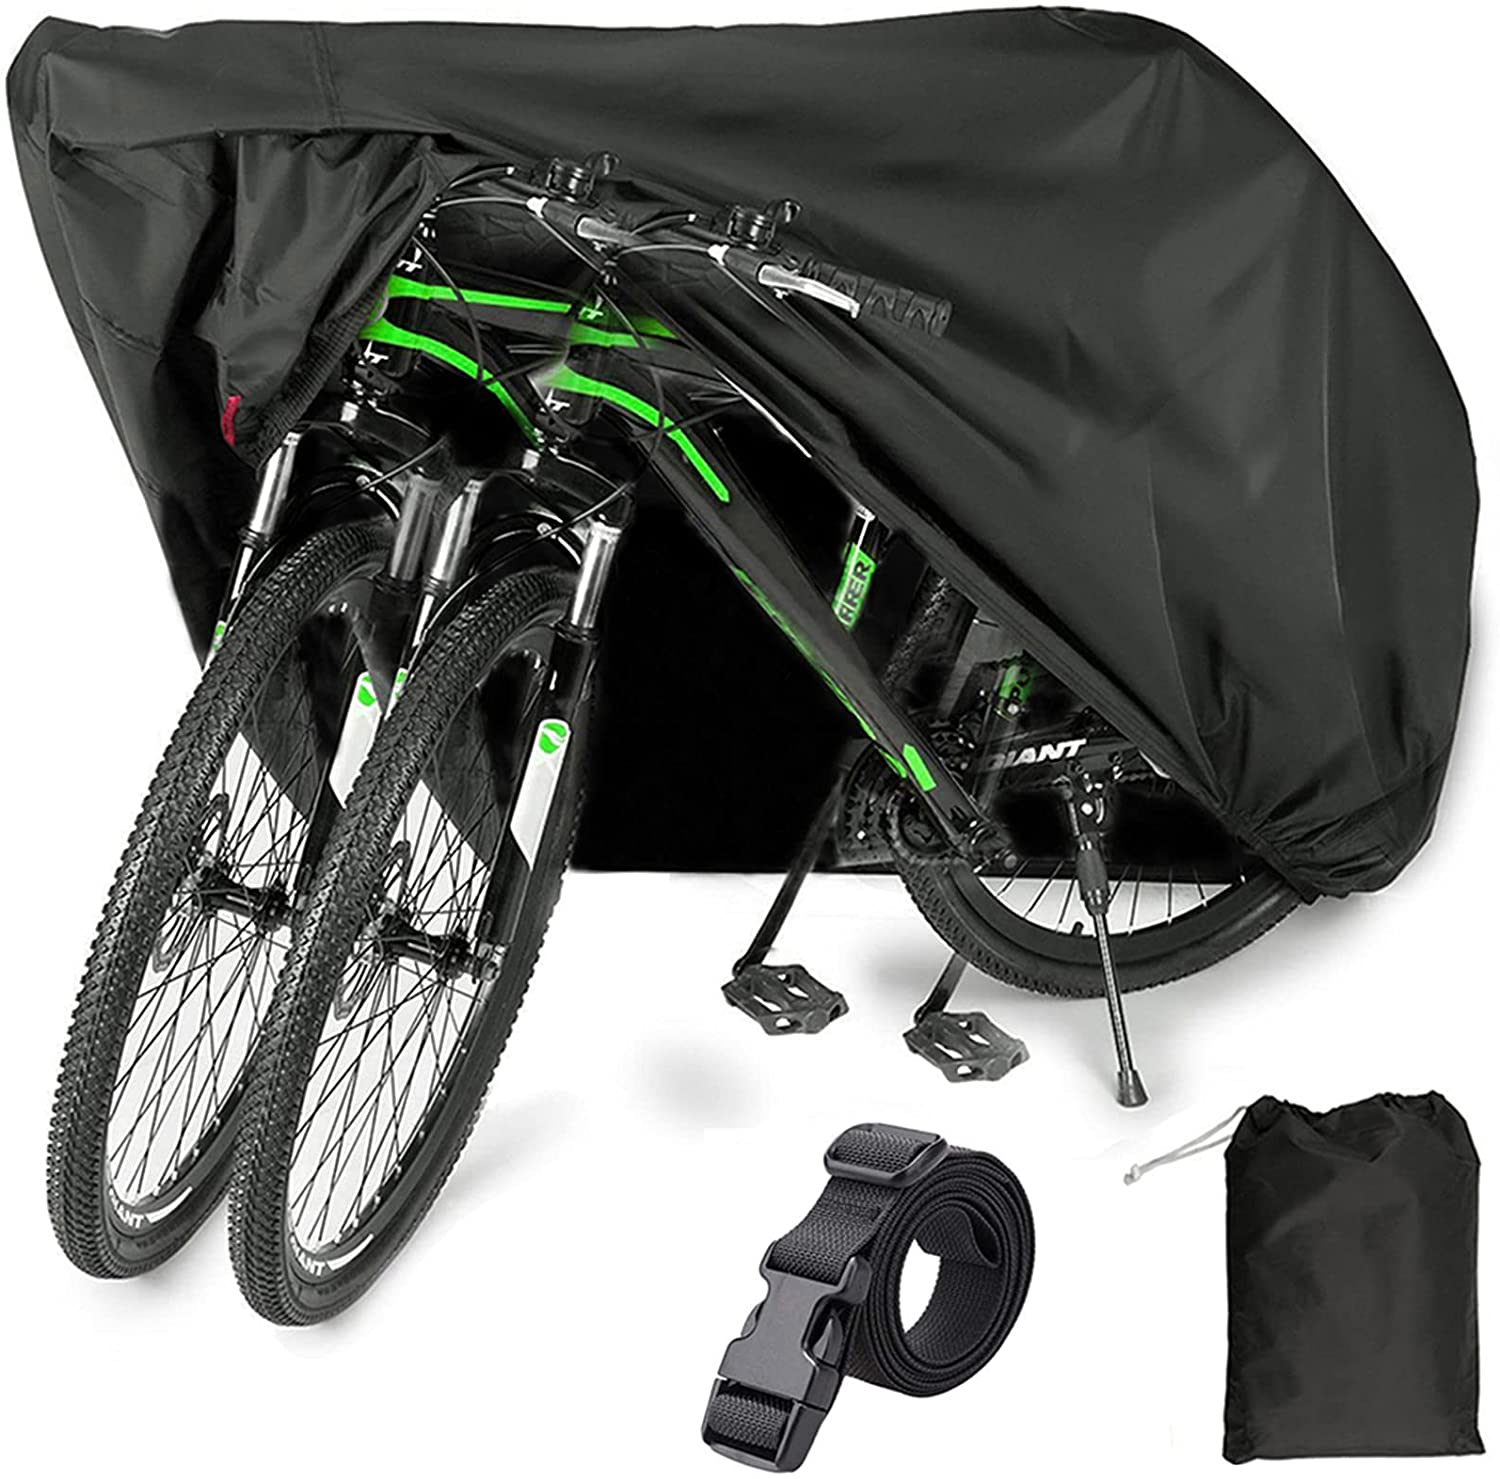 Heavy Duty Ripstop Material 210D Gazeer Bicycle Cover with Lock Hole Reflective Safety Loops for 29er Mountain Road Electric Bike Motorcycle Cruiser Outdoor Storage Anti-UV Waterproof 